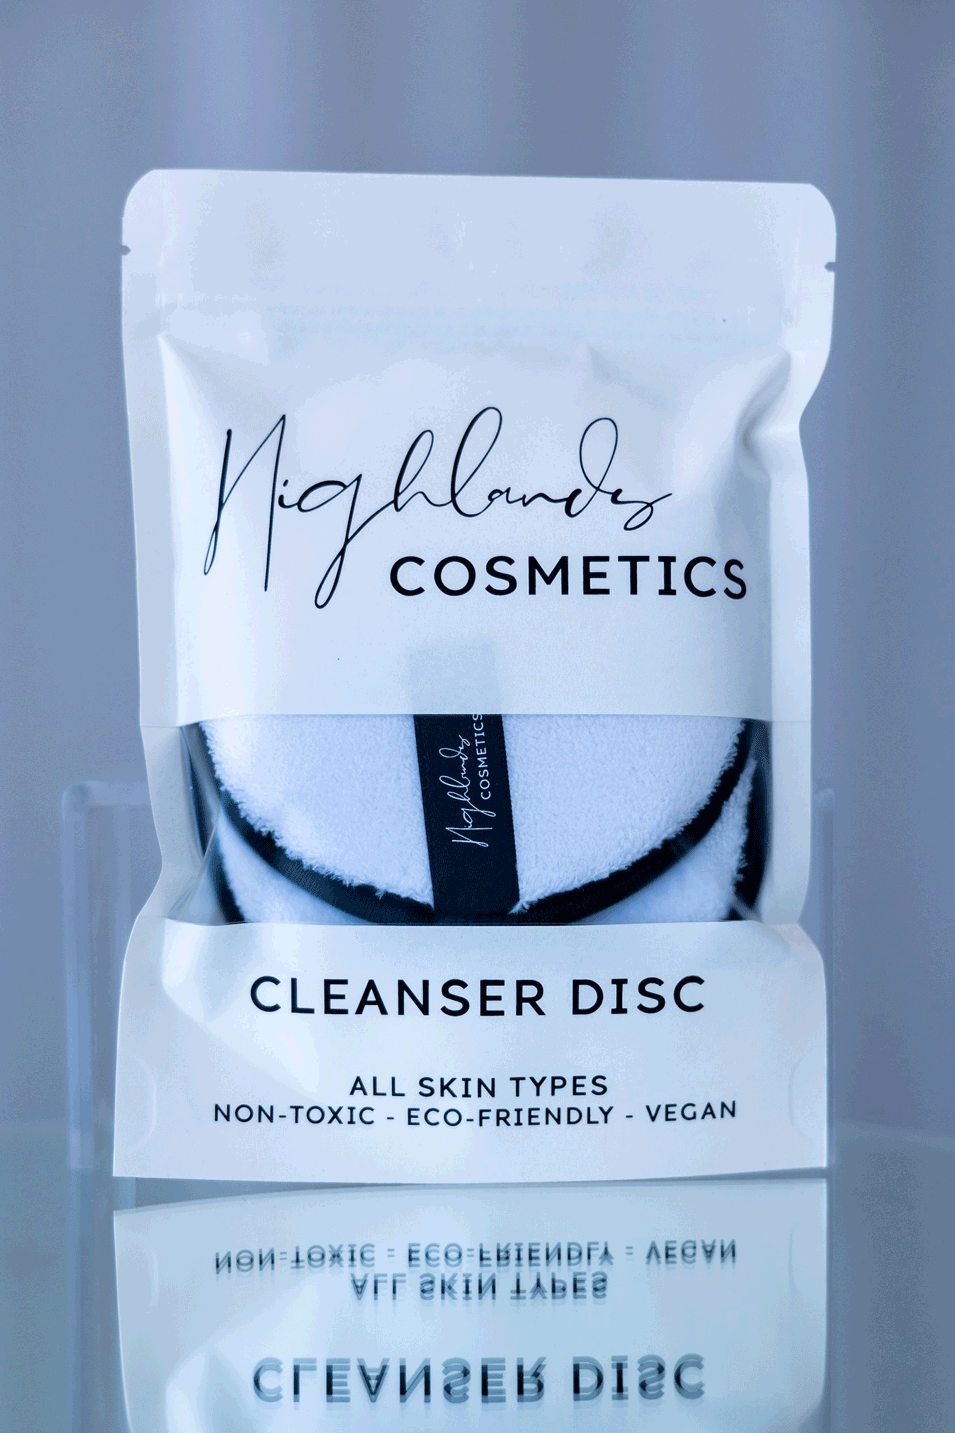 Cleanser Discs (2 x 2 Pack)